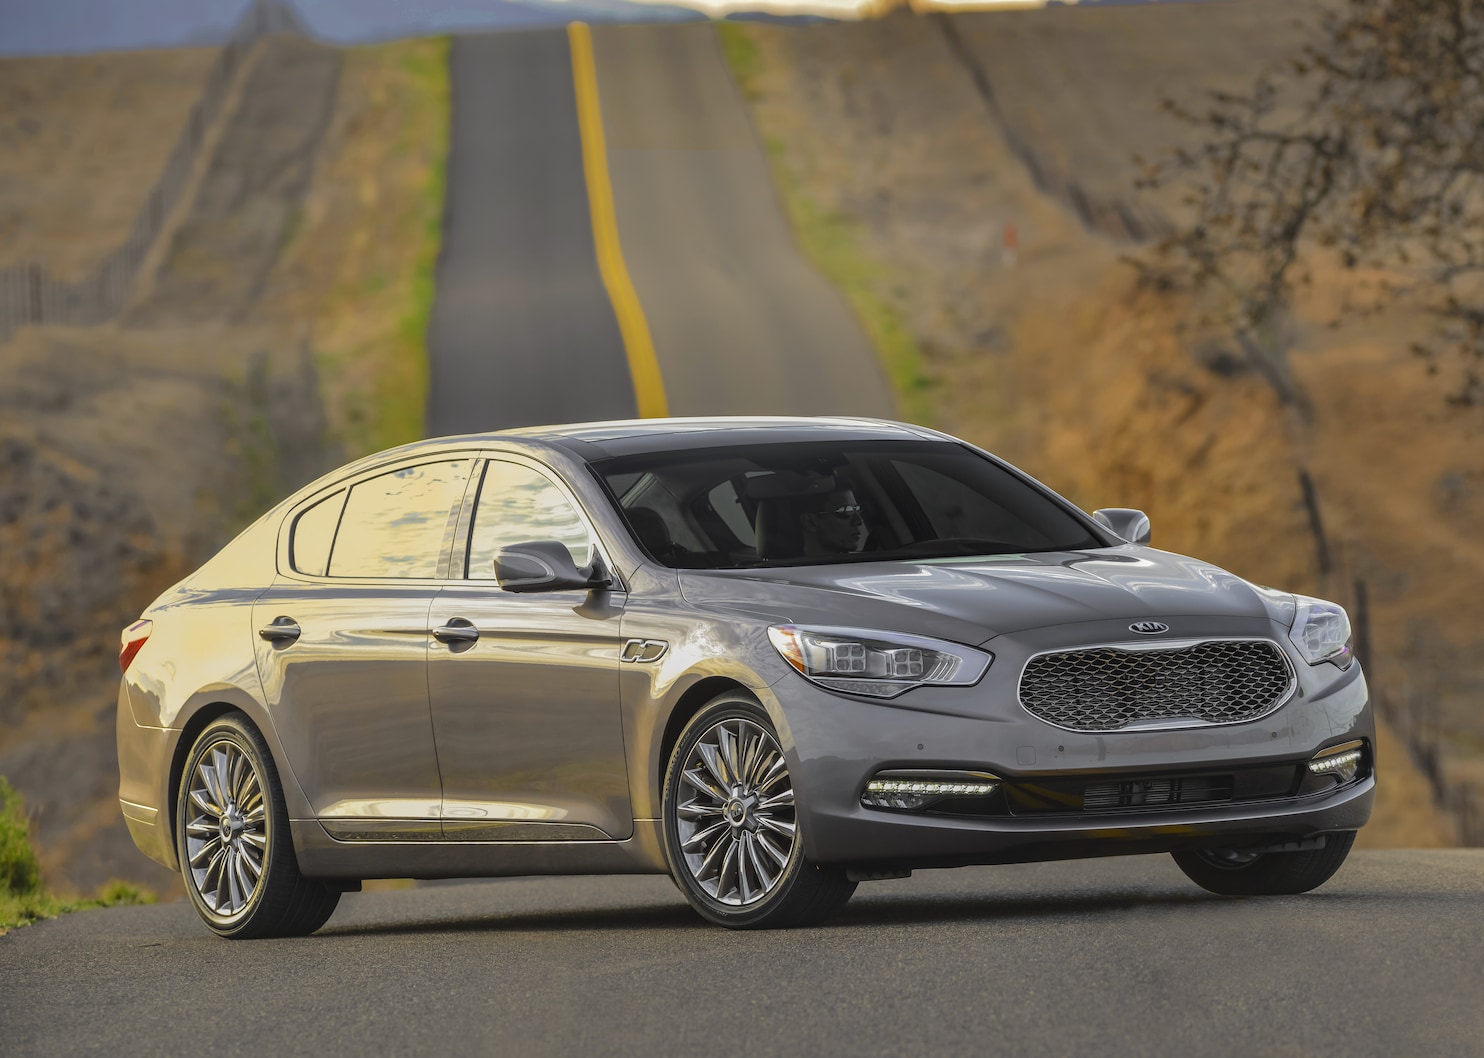 The Kia K900 reflects a welcome trend: Cheaper, more available safety  technology - The Washington Post